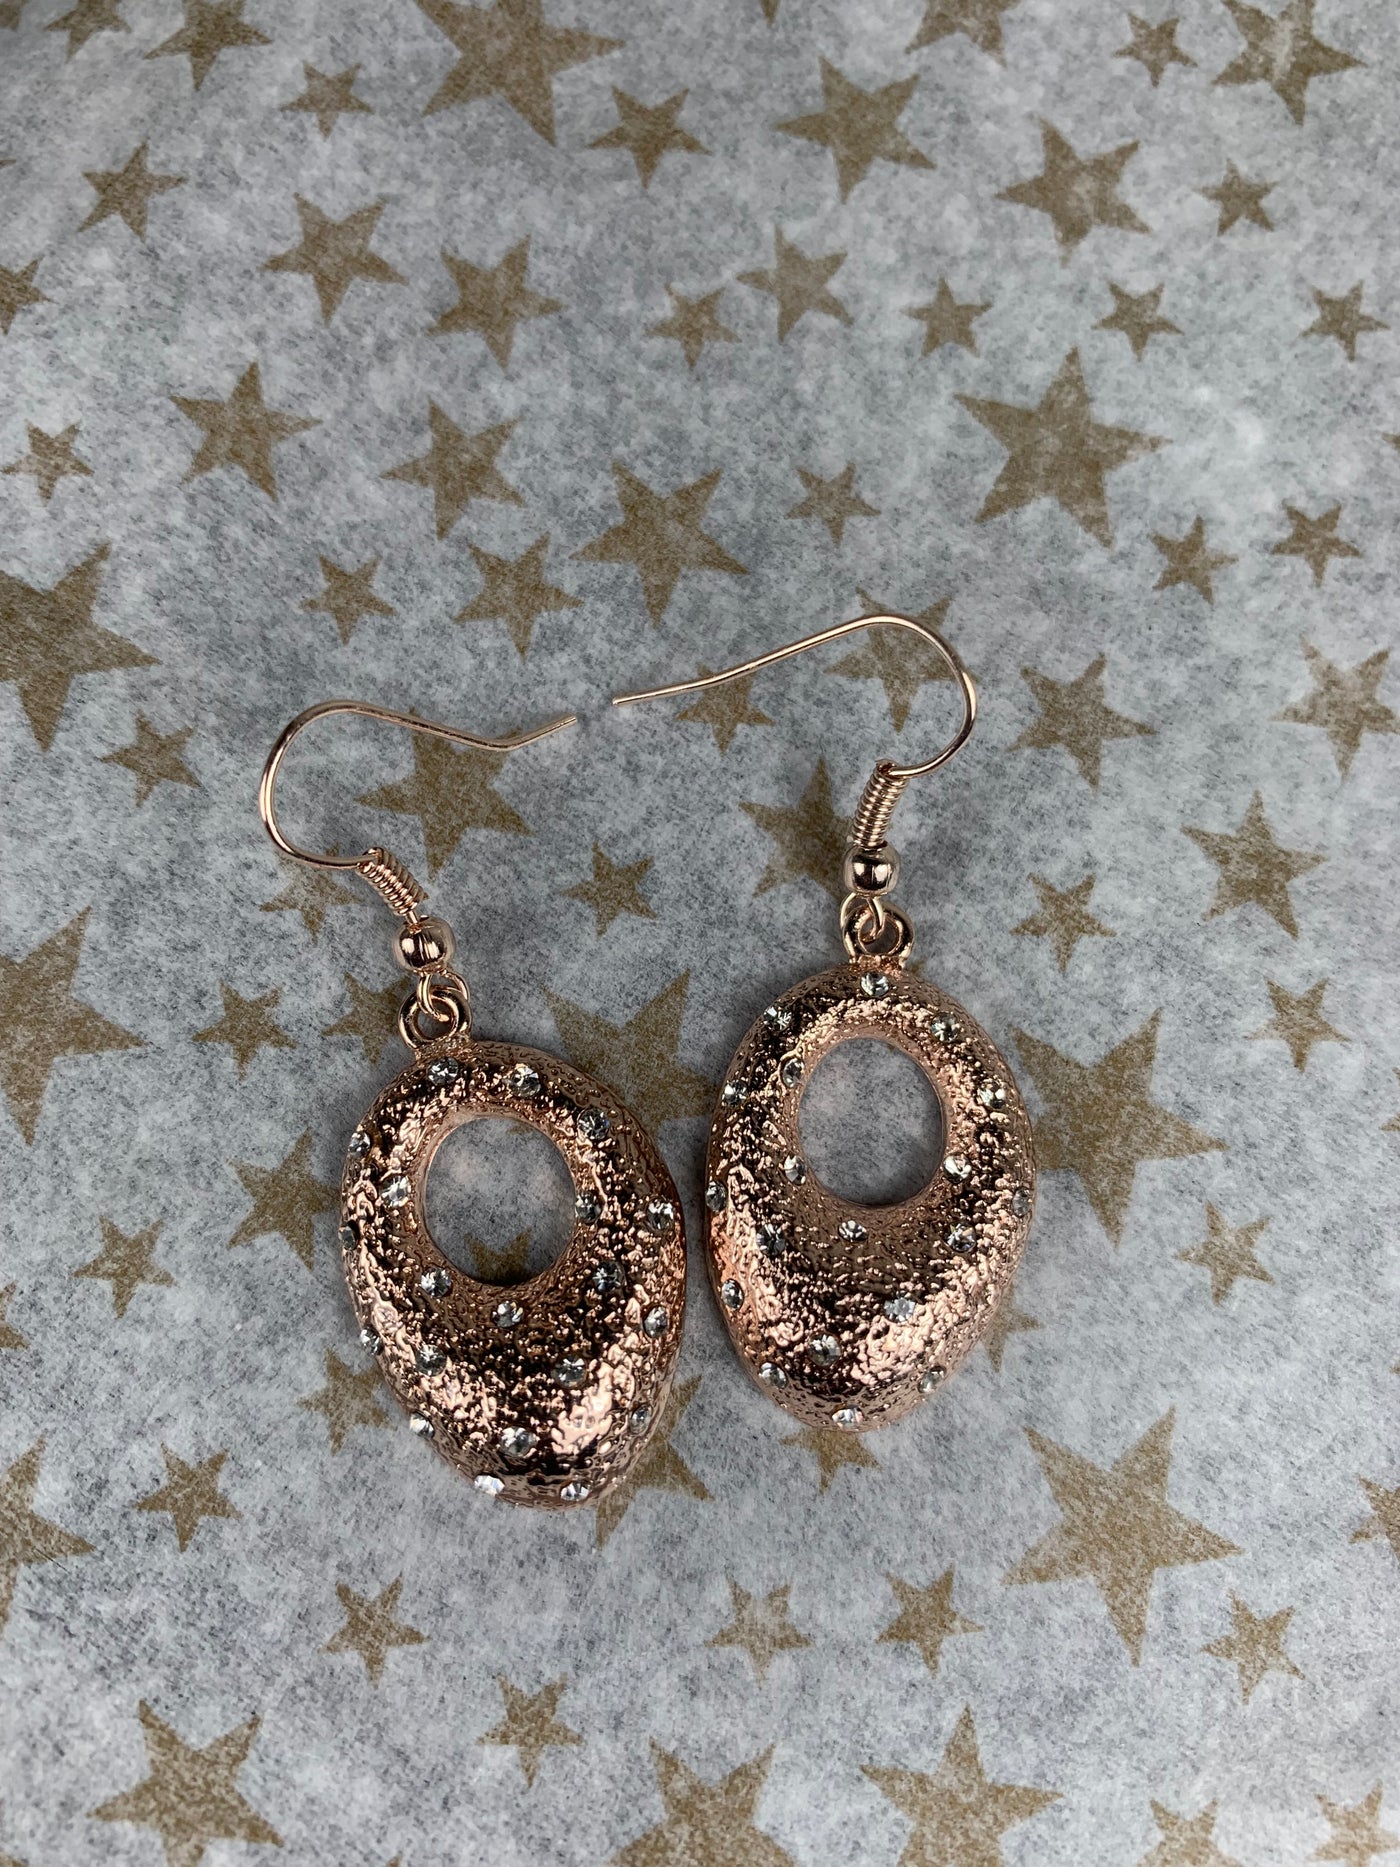 Puffy Oval Donut Shape Dangling Earrings with Crystal Accents